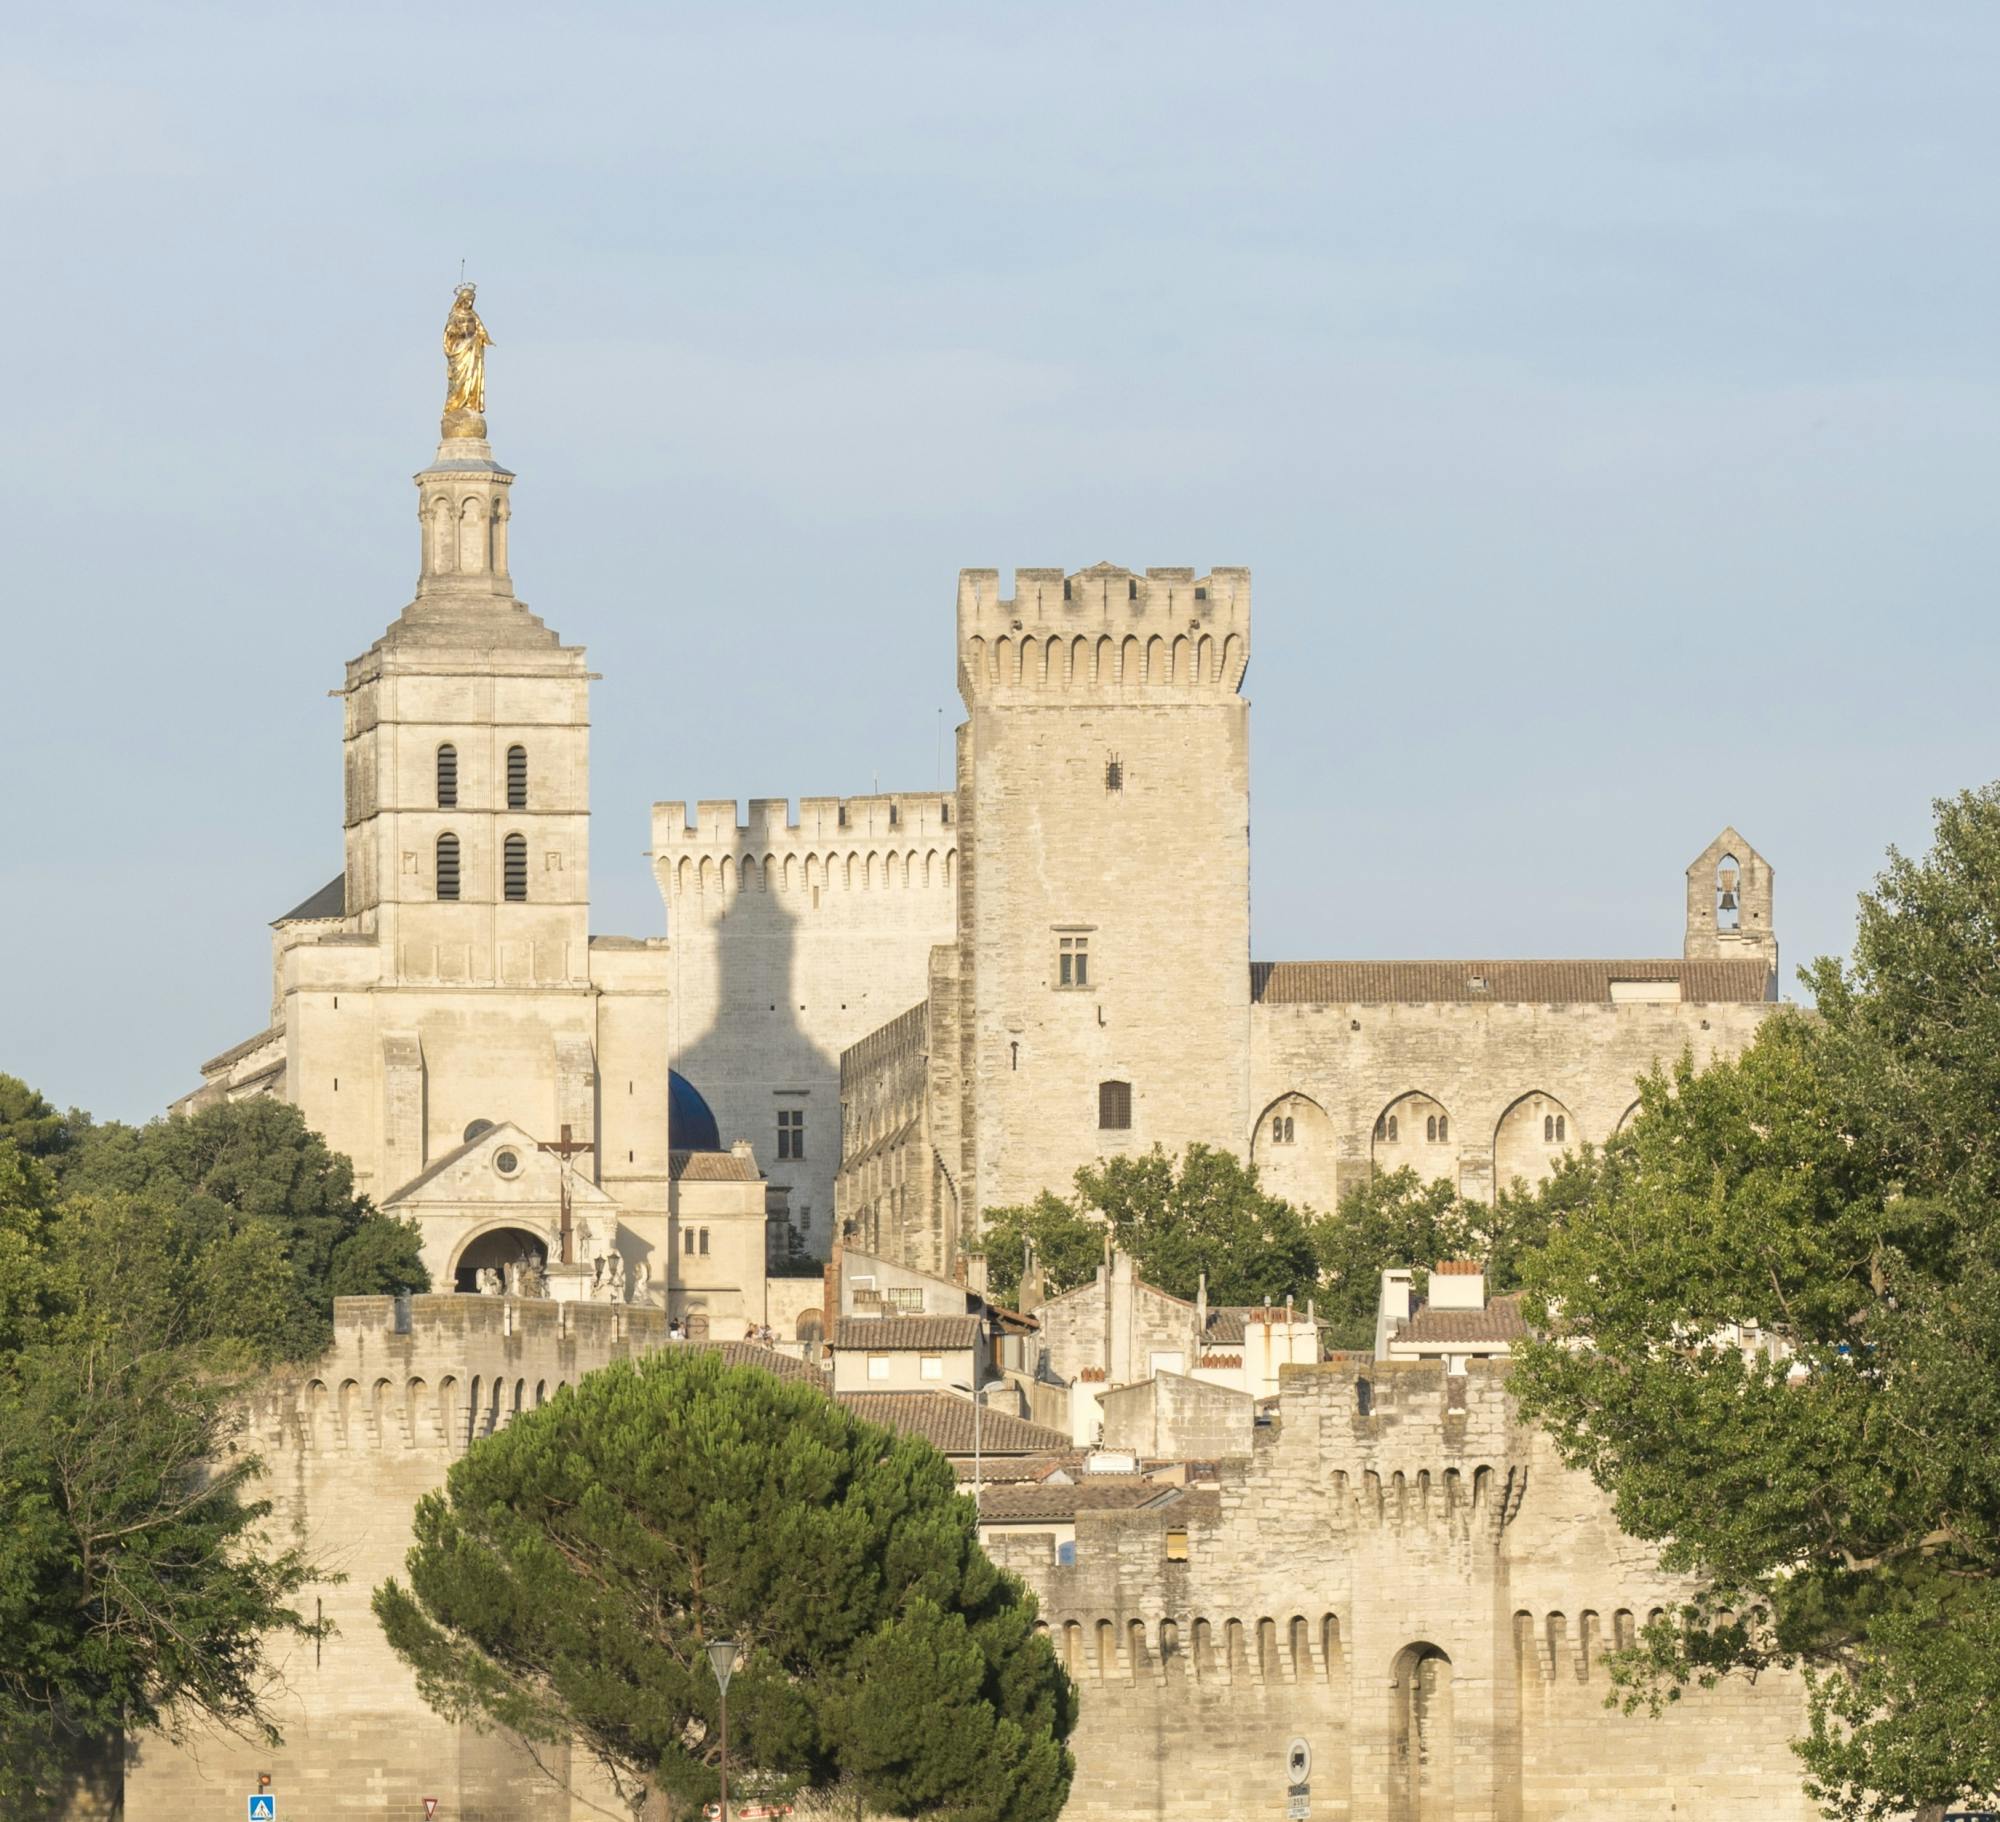 Walking Tour of Avignon and Popes' Palace